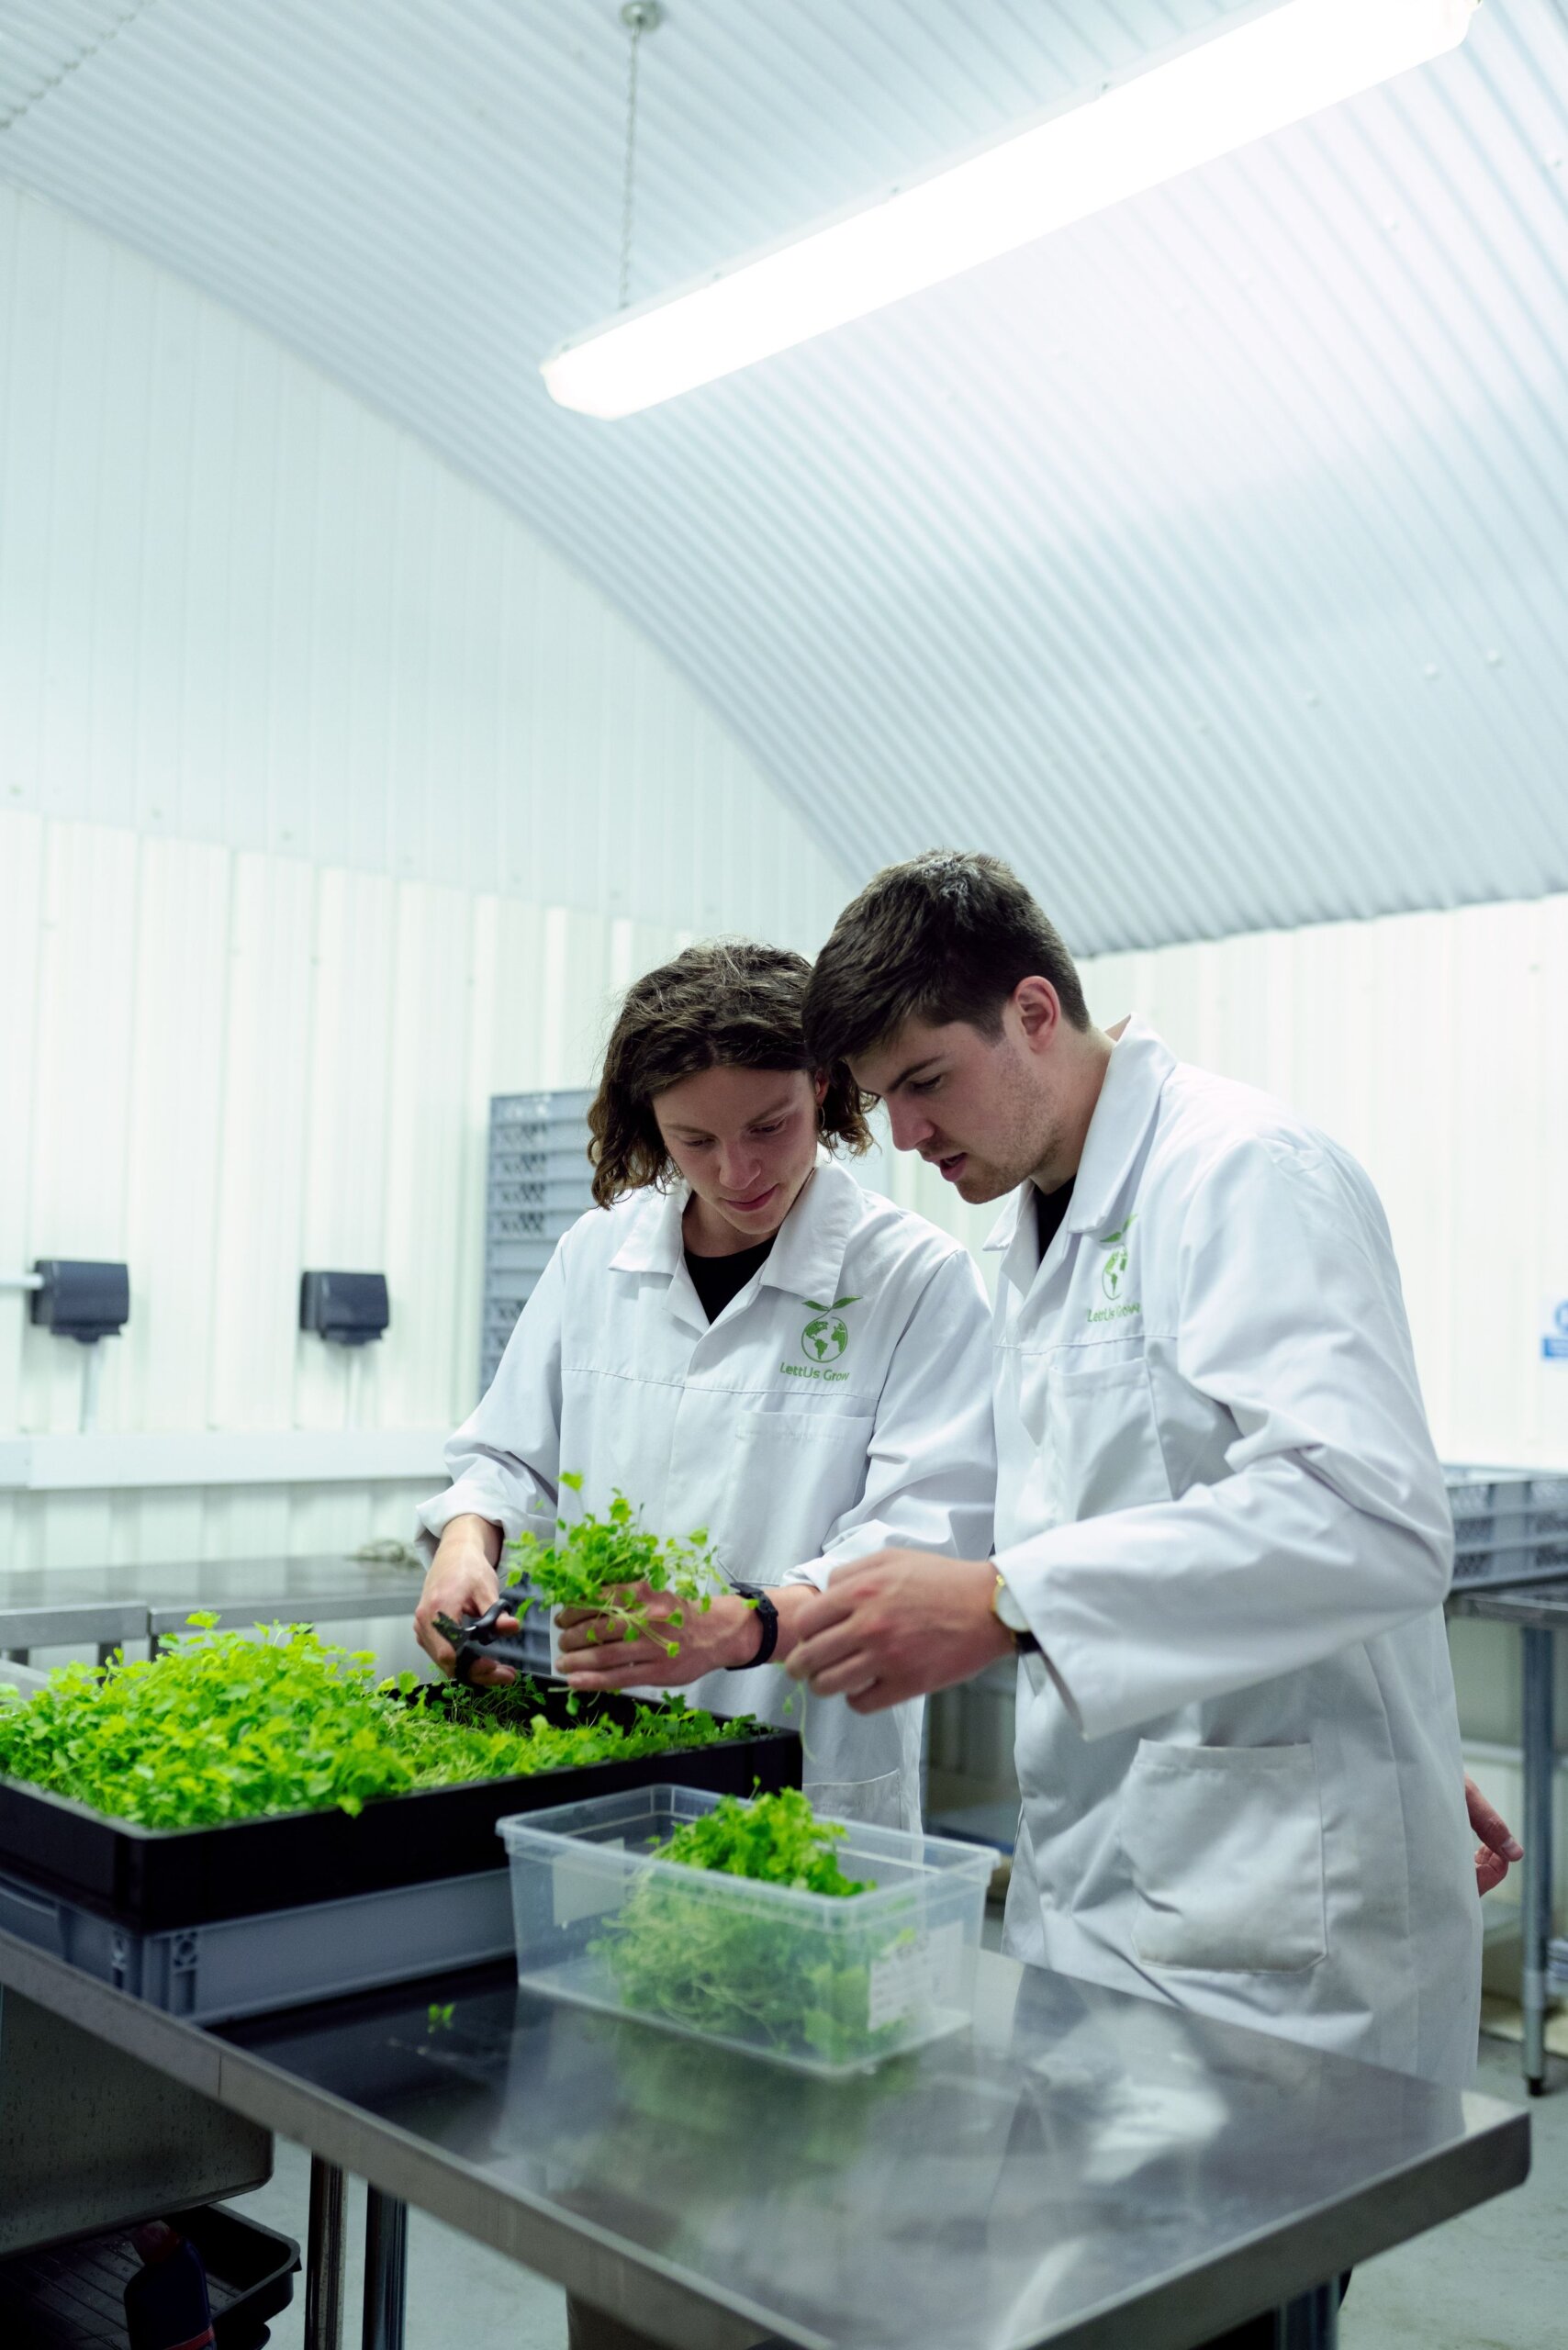 Two young men in lab coats sort through plants